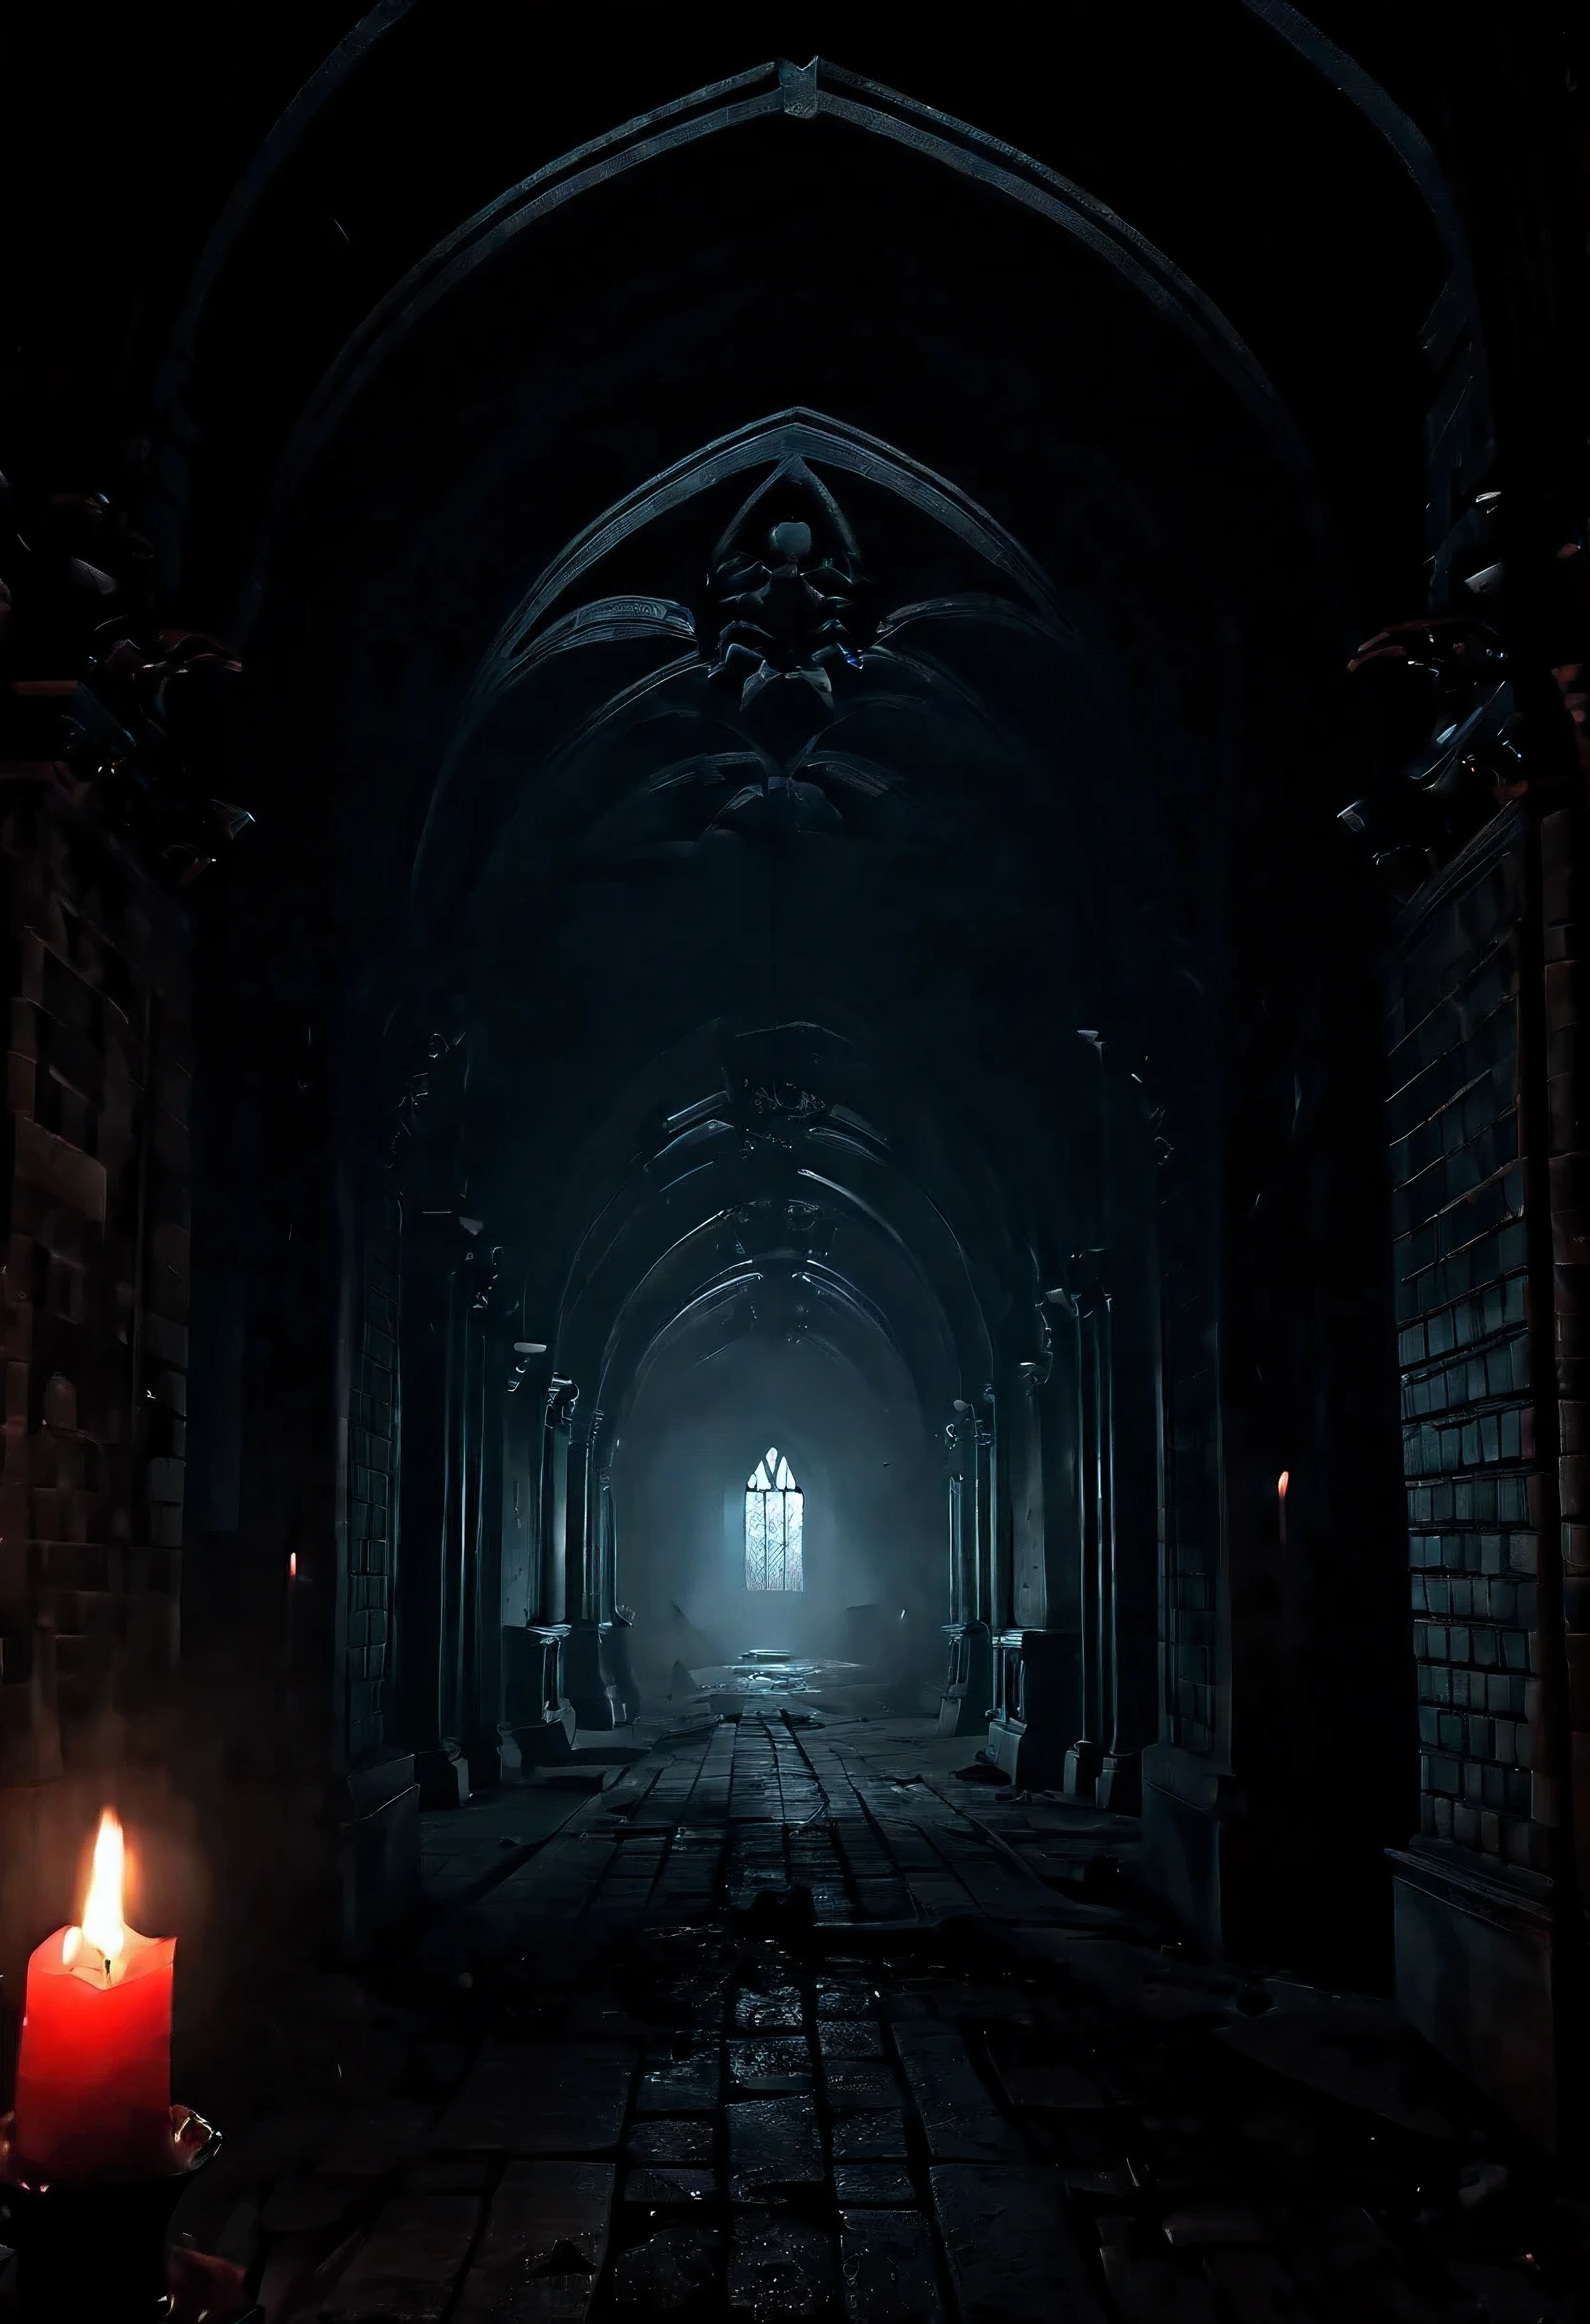 (main subject) eerie places, horror movie setting, Dracula castle style (material) dark and haunting illustrations, gothic, mysterious (additional details) foggy atmosphere, creepy shadows, eerie sounds echoing, old and decaying architecture, moonlit sky (image quality) (best quality, highres), ultra-detailed, (photorealistic:1.37) (art style) horror, gothic, dark fantasy (color tone) dark and desaturated with pops of deep red (light) dimly lit by flickering candlelight, casting eerie and elongated shadows